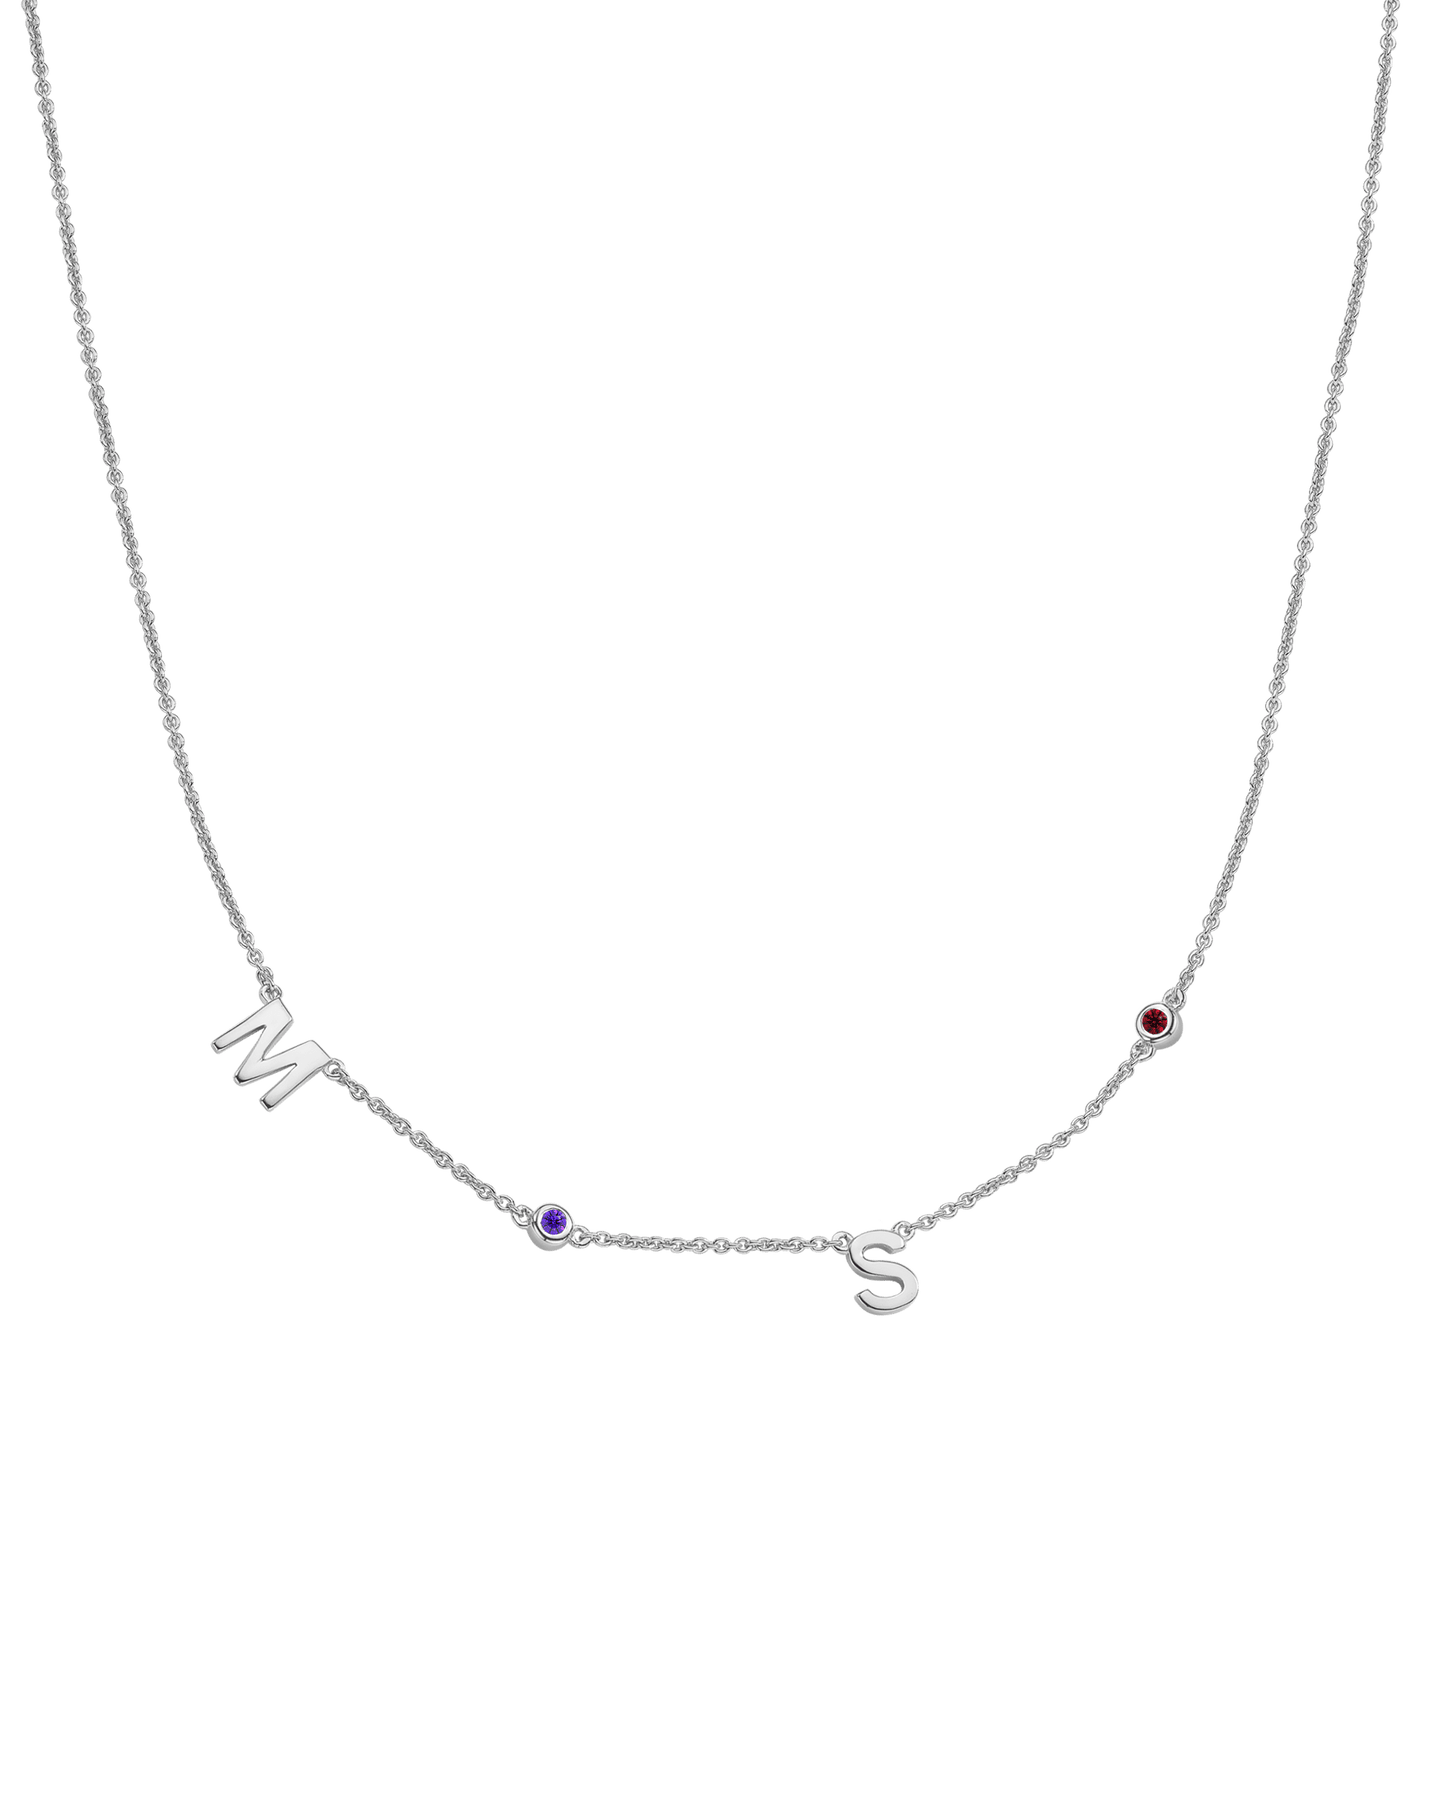 Initial Birthstone Necklace - 14K White Gold Necklaces magal-dev 2 Initials + 2 Birthstones Adjustable 16-17" (40cm-43cm) 